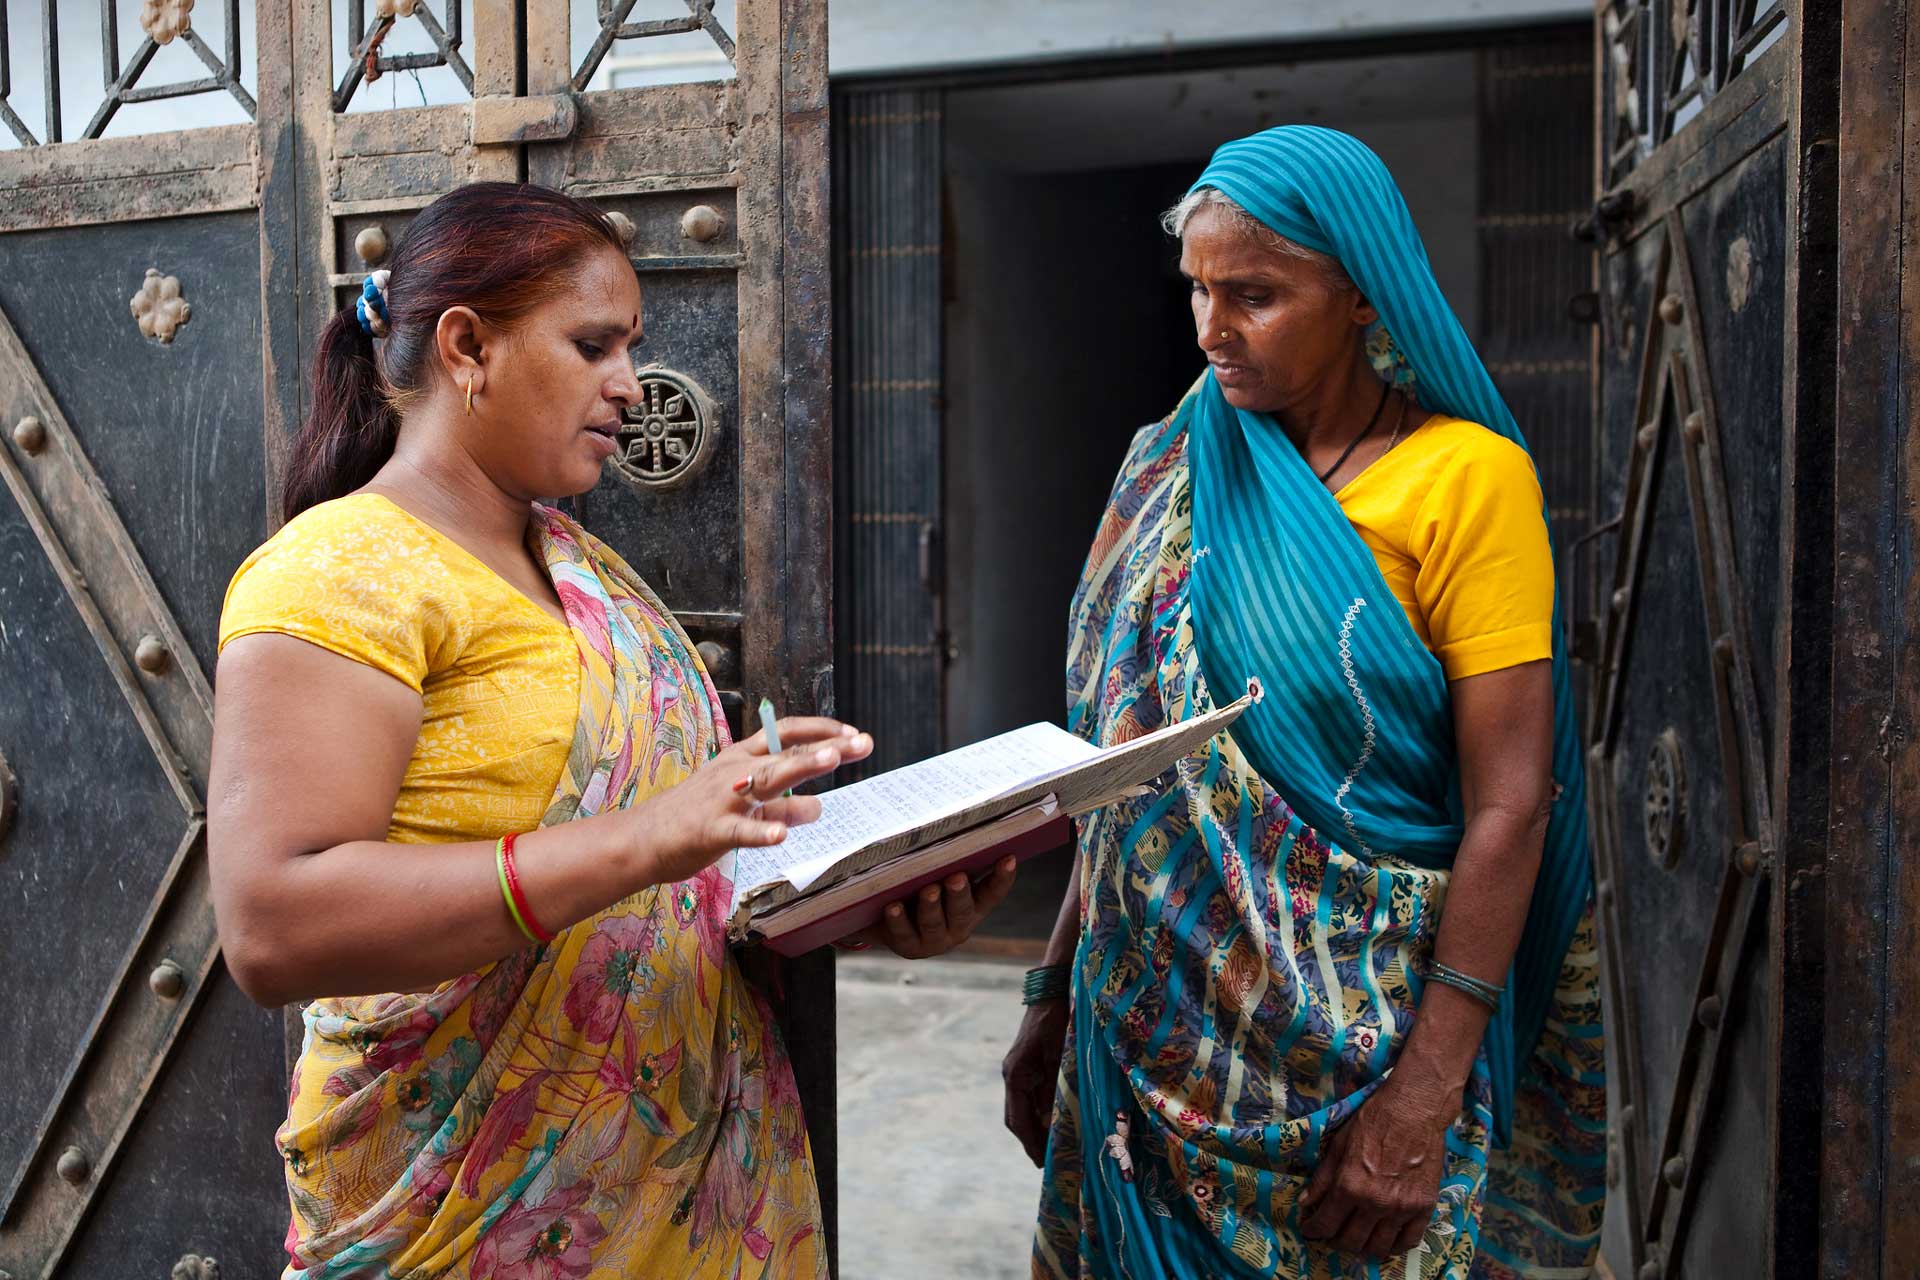 Savita Sharma informs a widow on her right to receive a pension in Vrindavan, India.